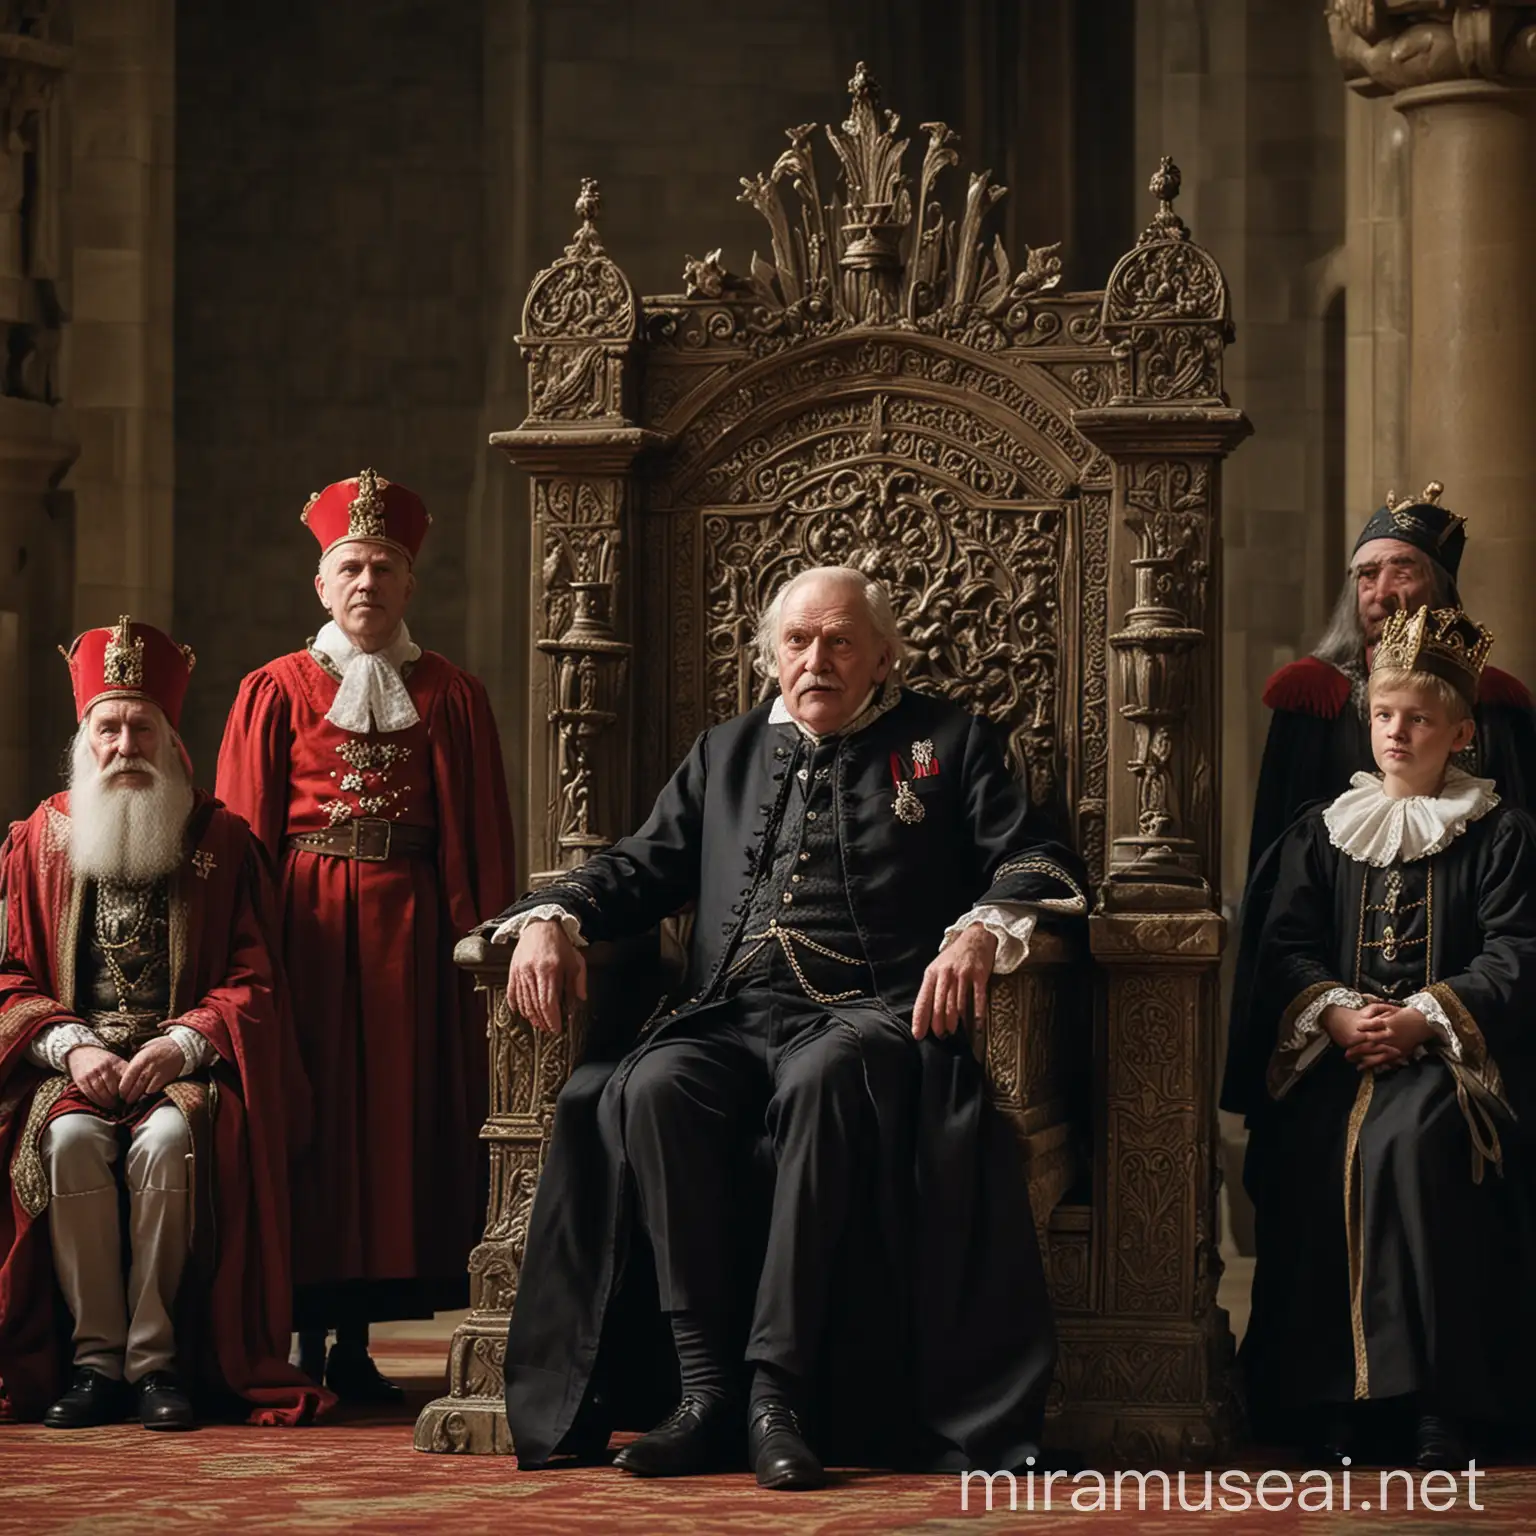 Grand Hall with Old Count on Throne and Young Subjects Laughing